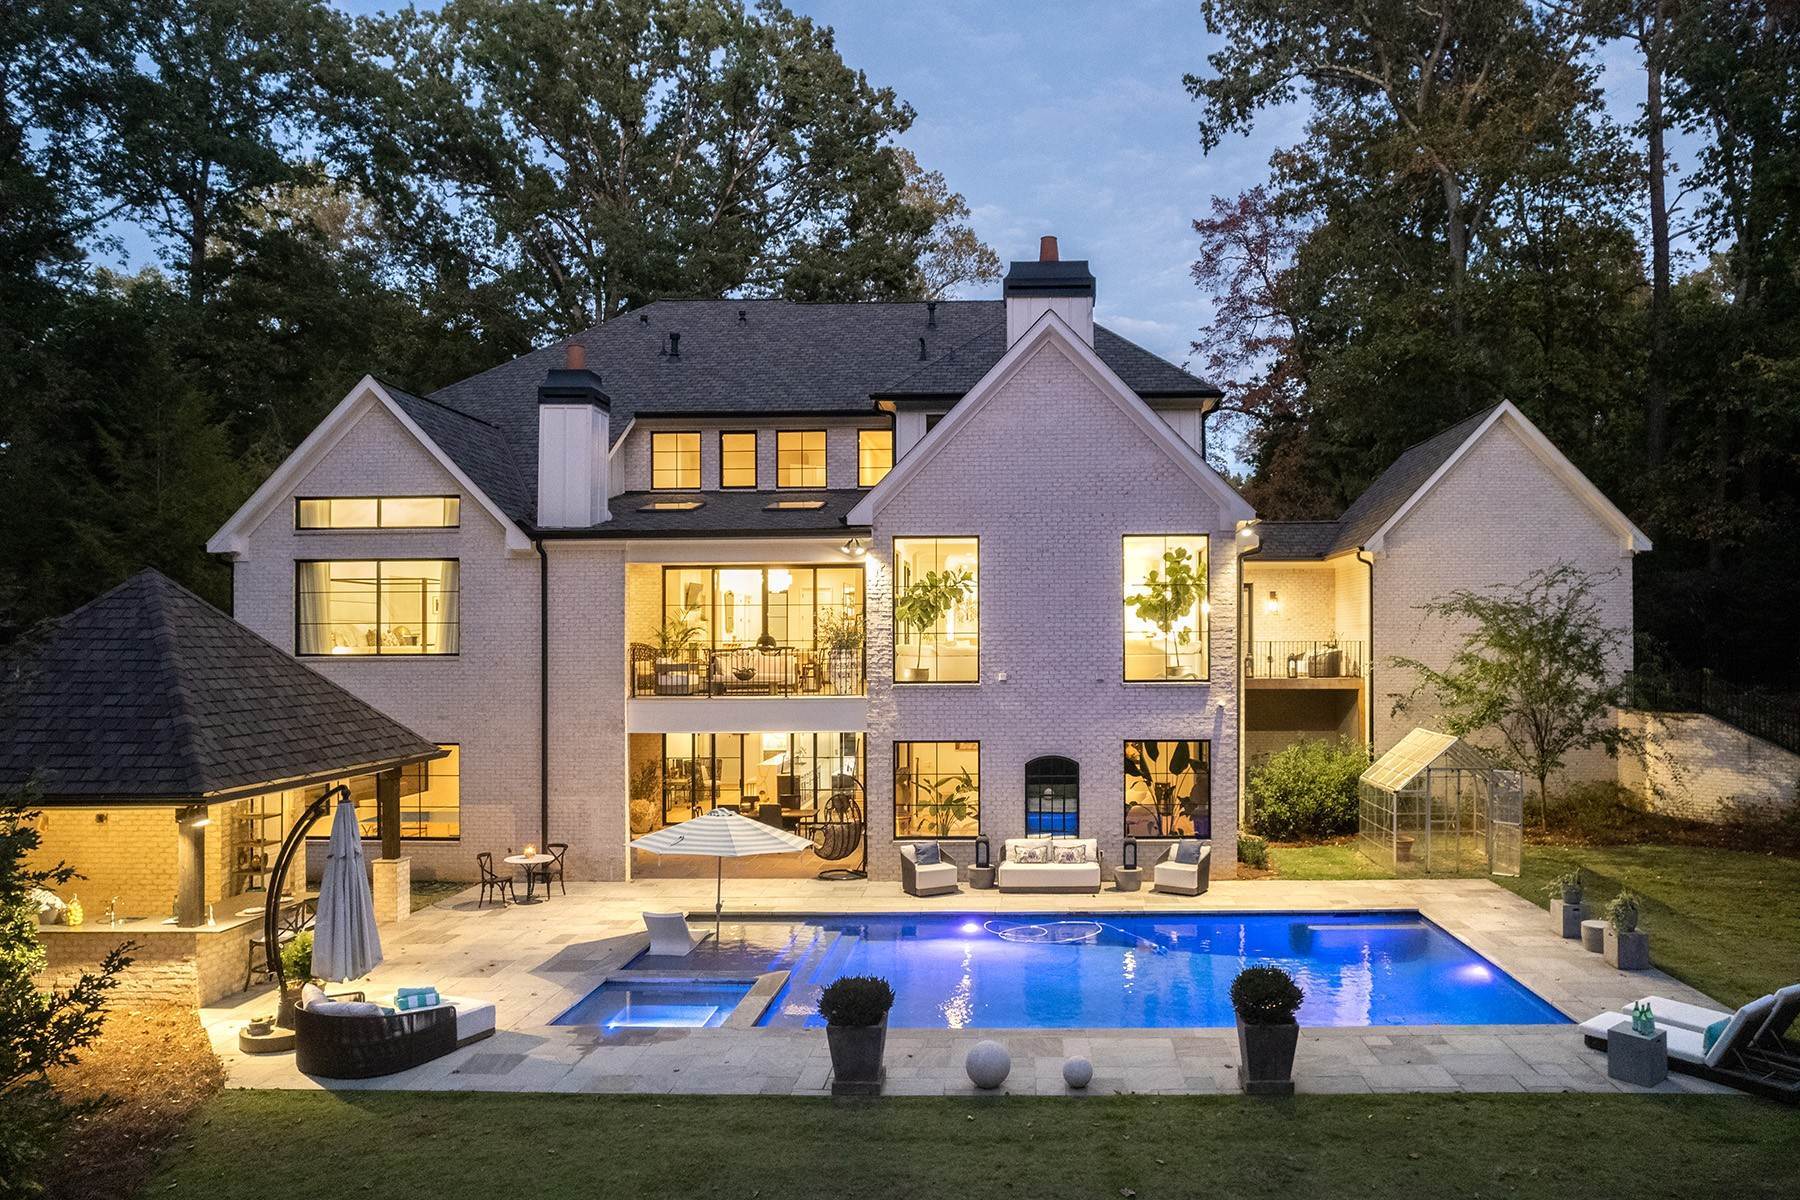 Single Family Homes for Sale at Sophisticated Modern Elegance Abounds in Private Gated Property 4220 Harris Trail NW Atlanta, Georgia 30327 United States